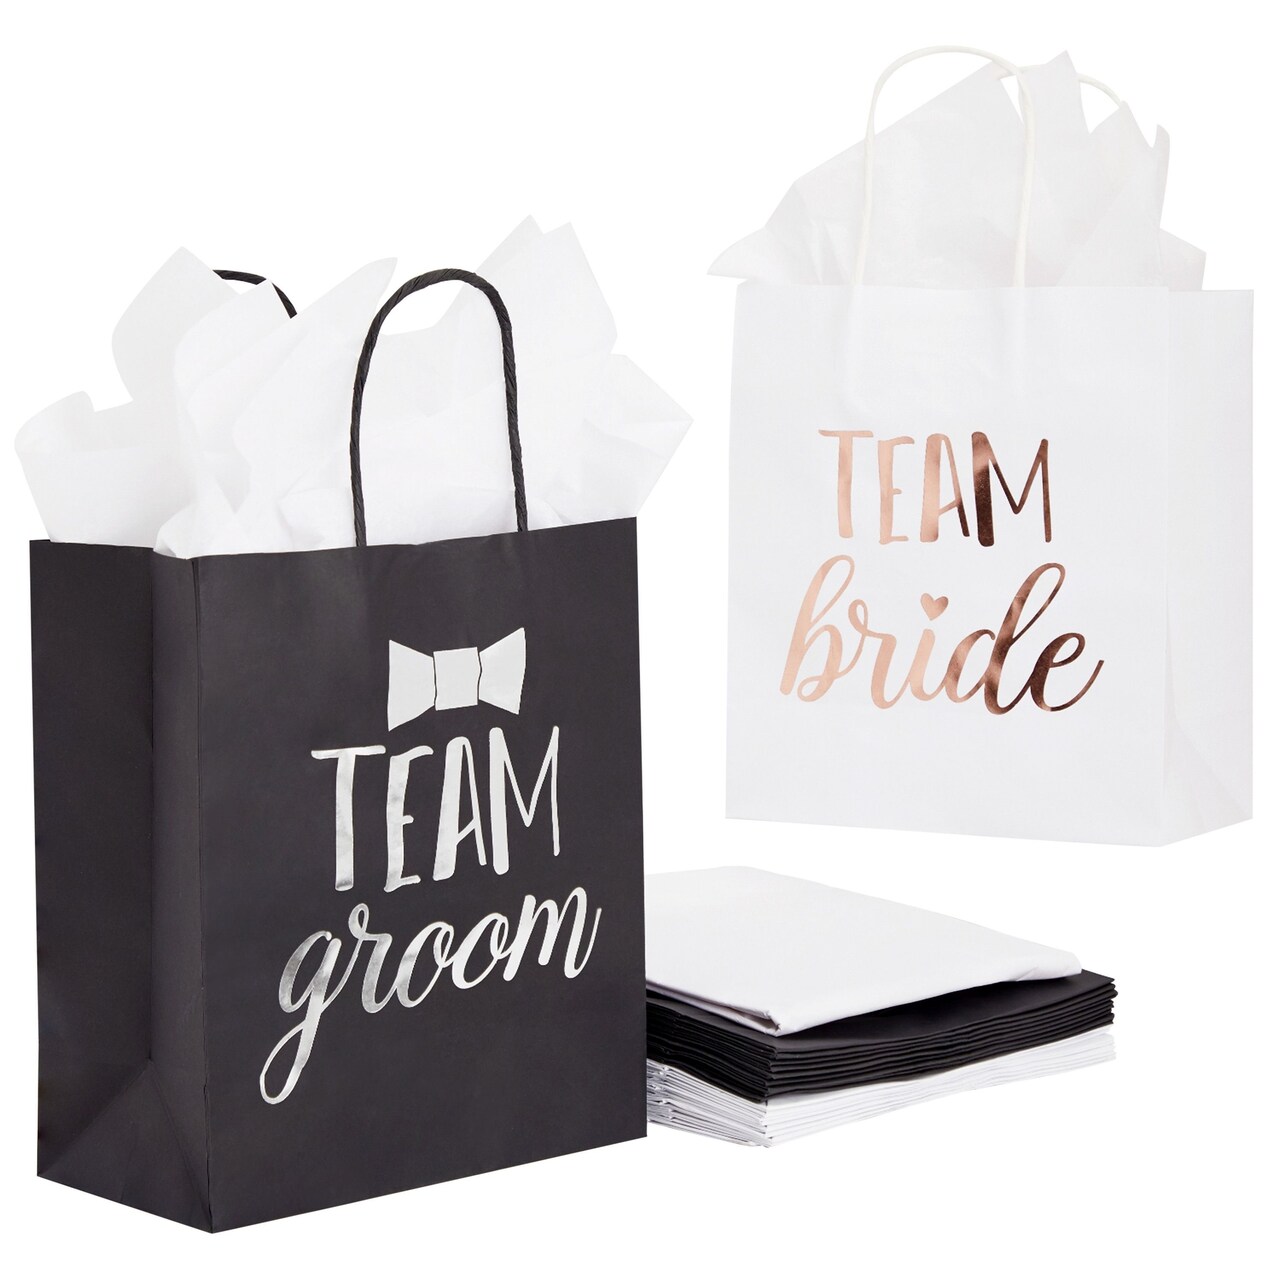 20 Pack Bride and Groom Gift Bags with Tissue Paper for Wedding